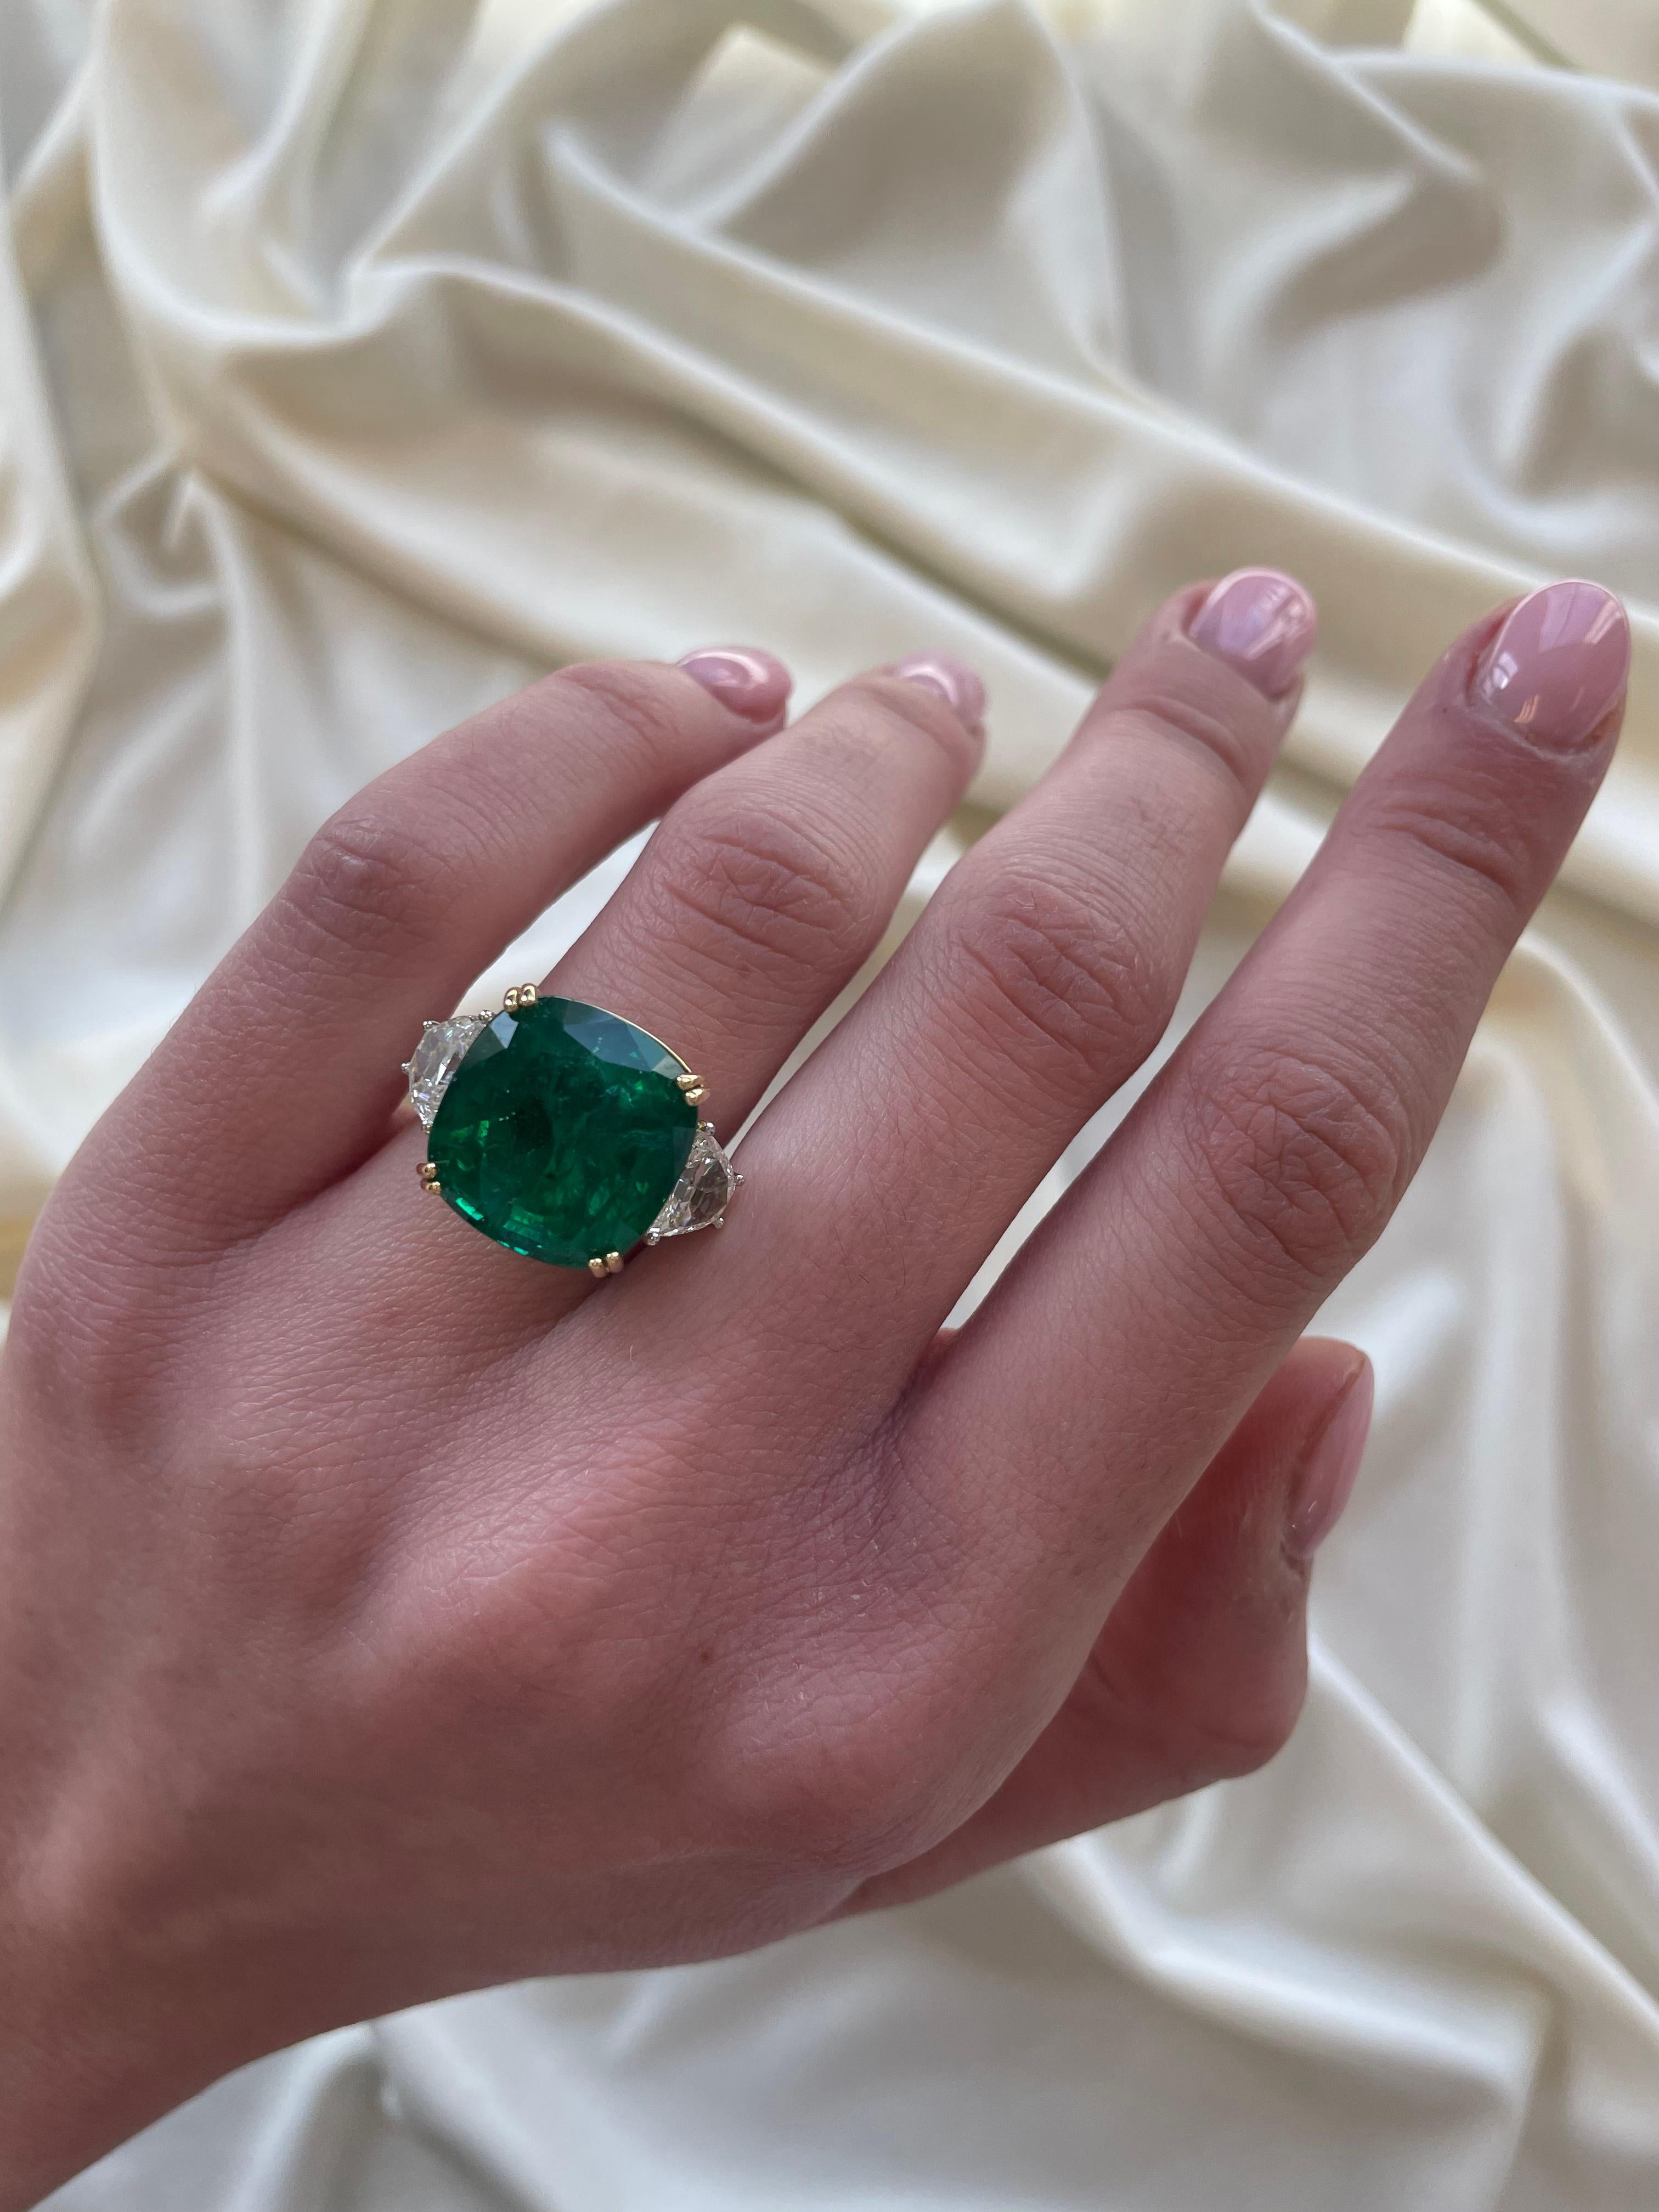 Impressive GRS certified Zambian emerald with GIA certified half-moon diamonds three-stone ring. High jewelry by Alexander Beverly Hills.
15.53 carats total gemstone weight. 
GRS certified 14.09 carat Zambian emerald, Minor. Complemented with 2 GIA